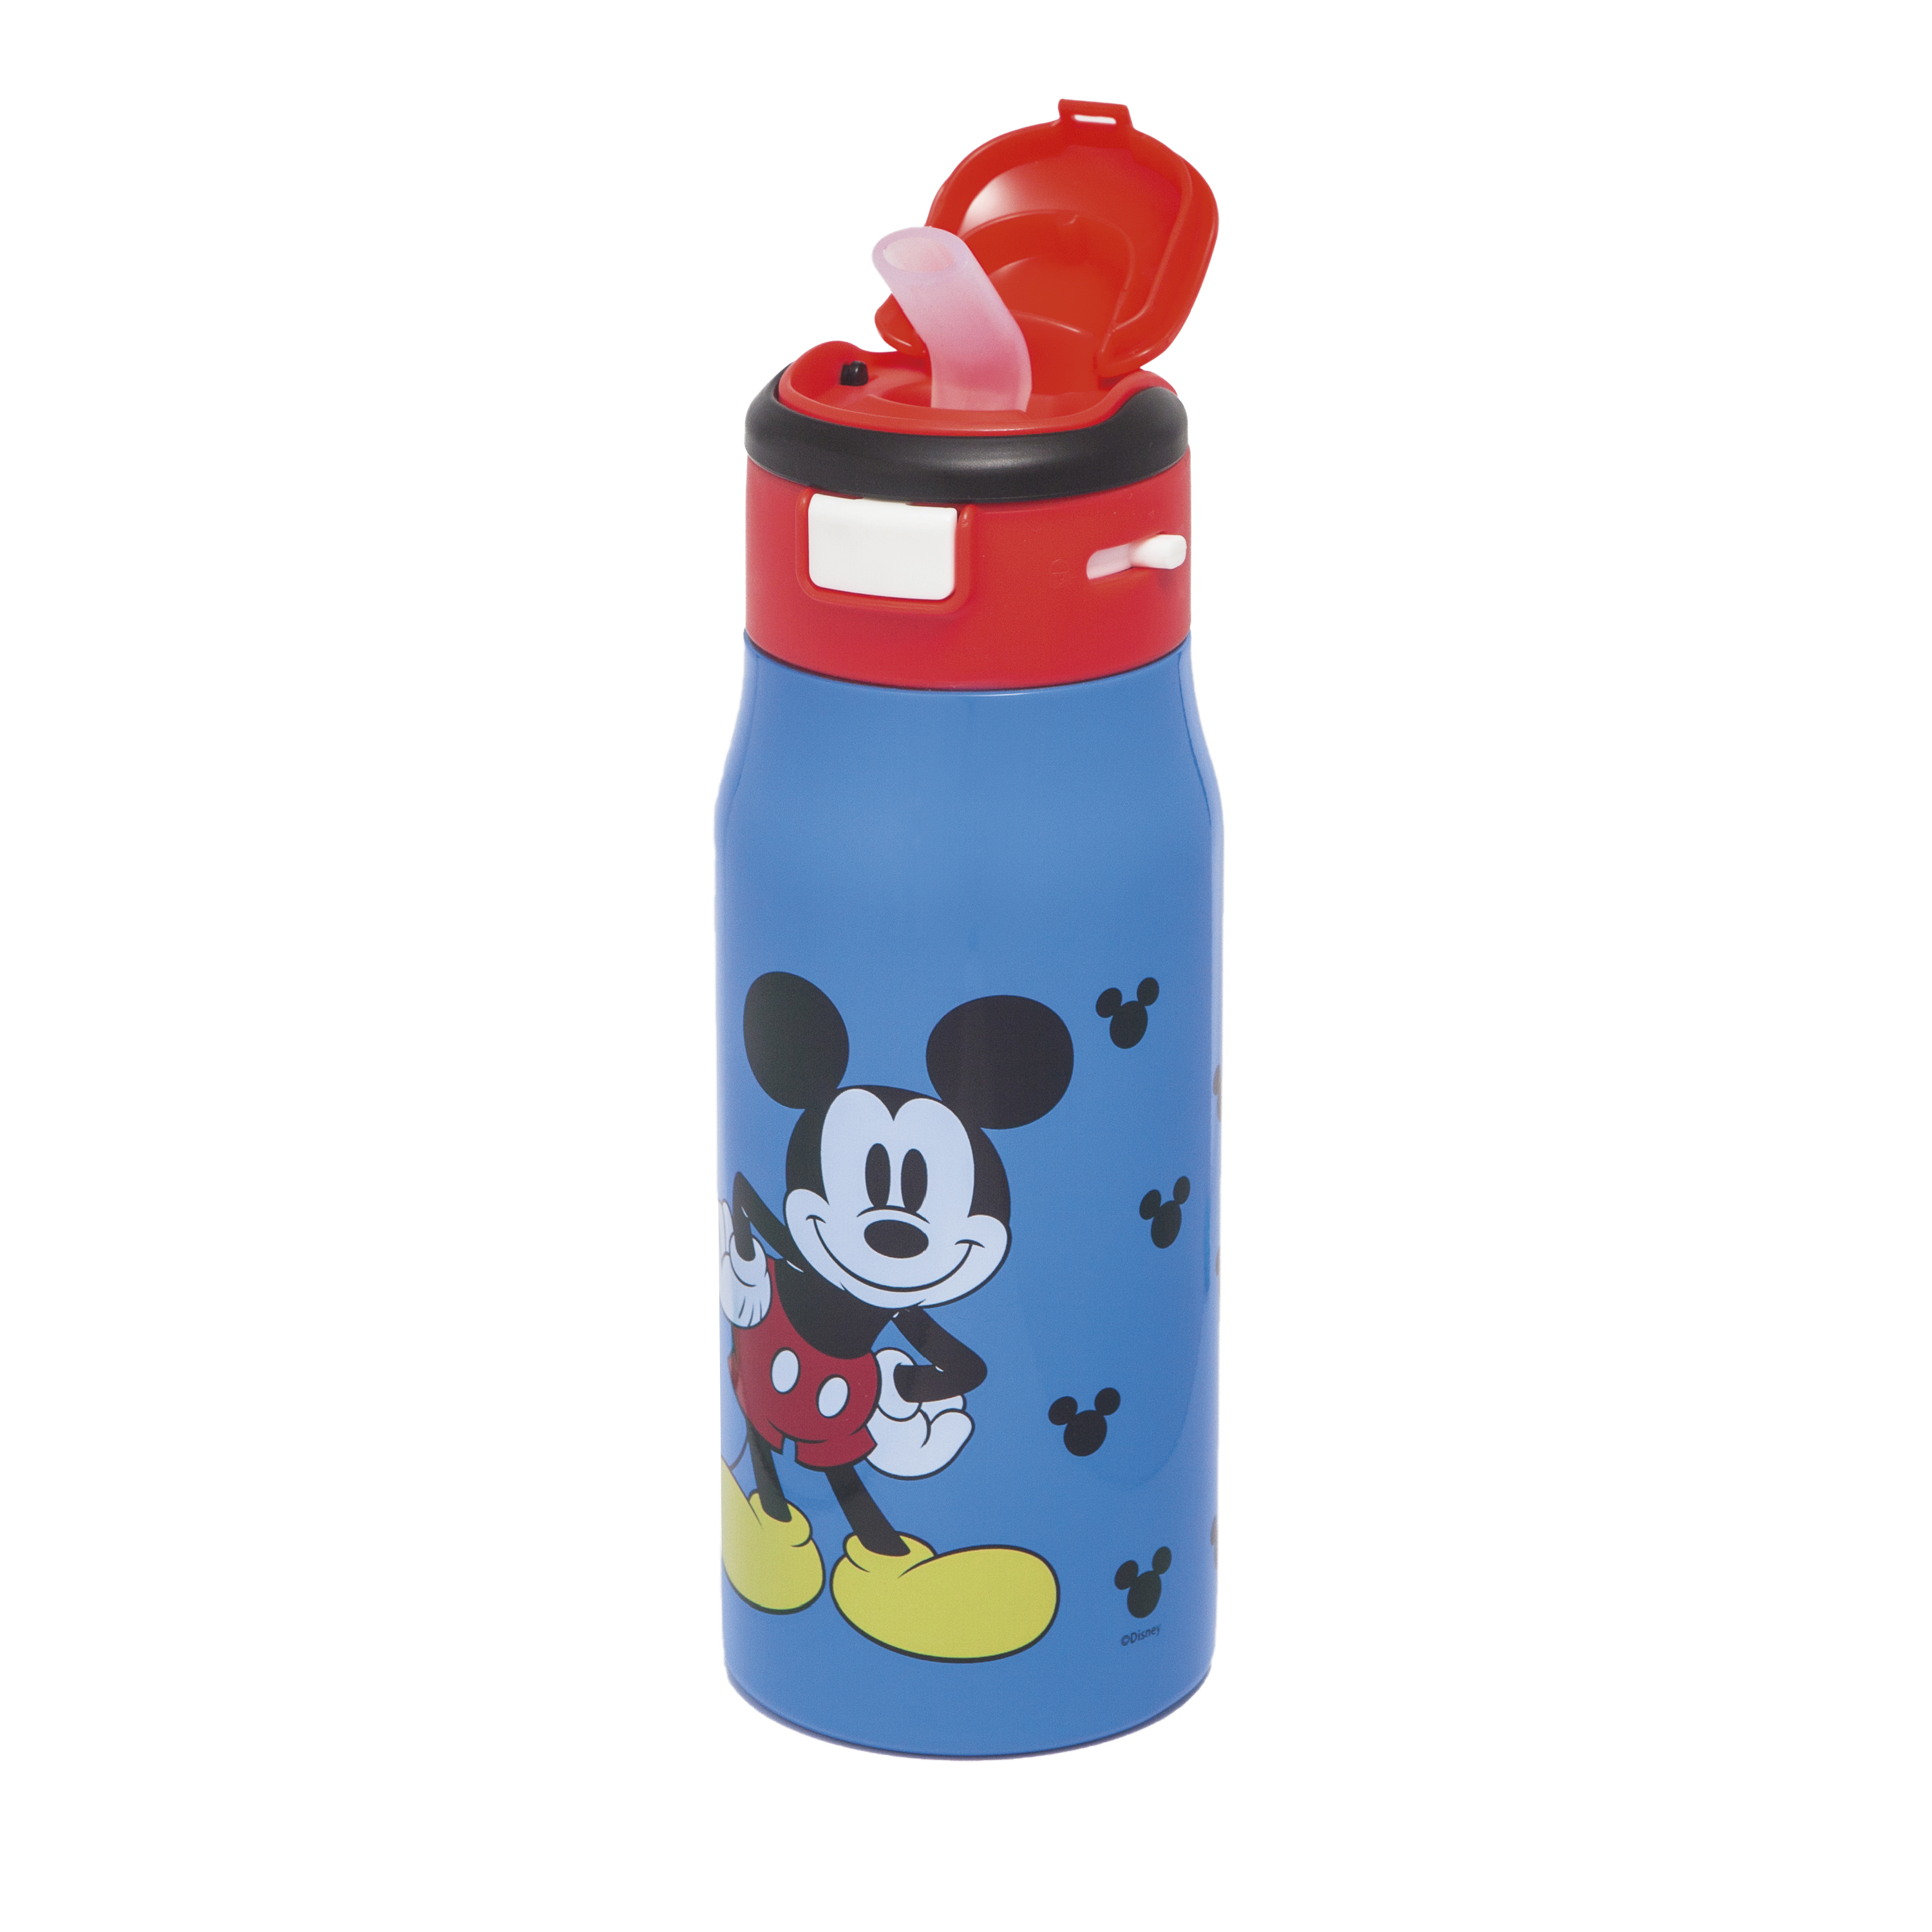 Disney 13.5 ounce Mesa Double Wall Insulated Stainless Steel Water Bottle, Mickey Mouse slideshow image 3